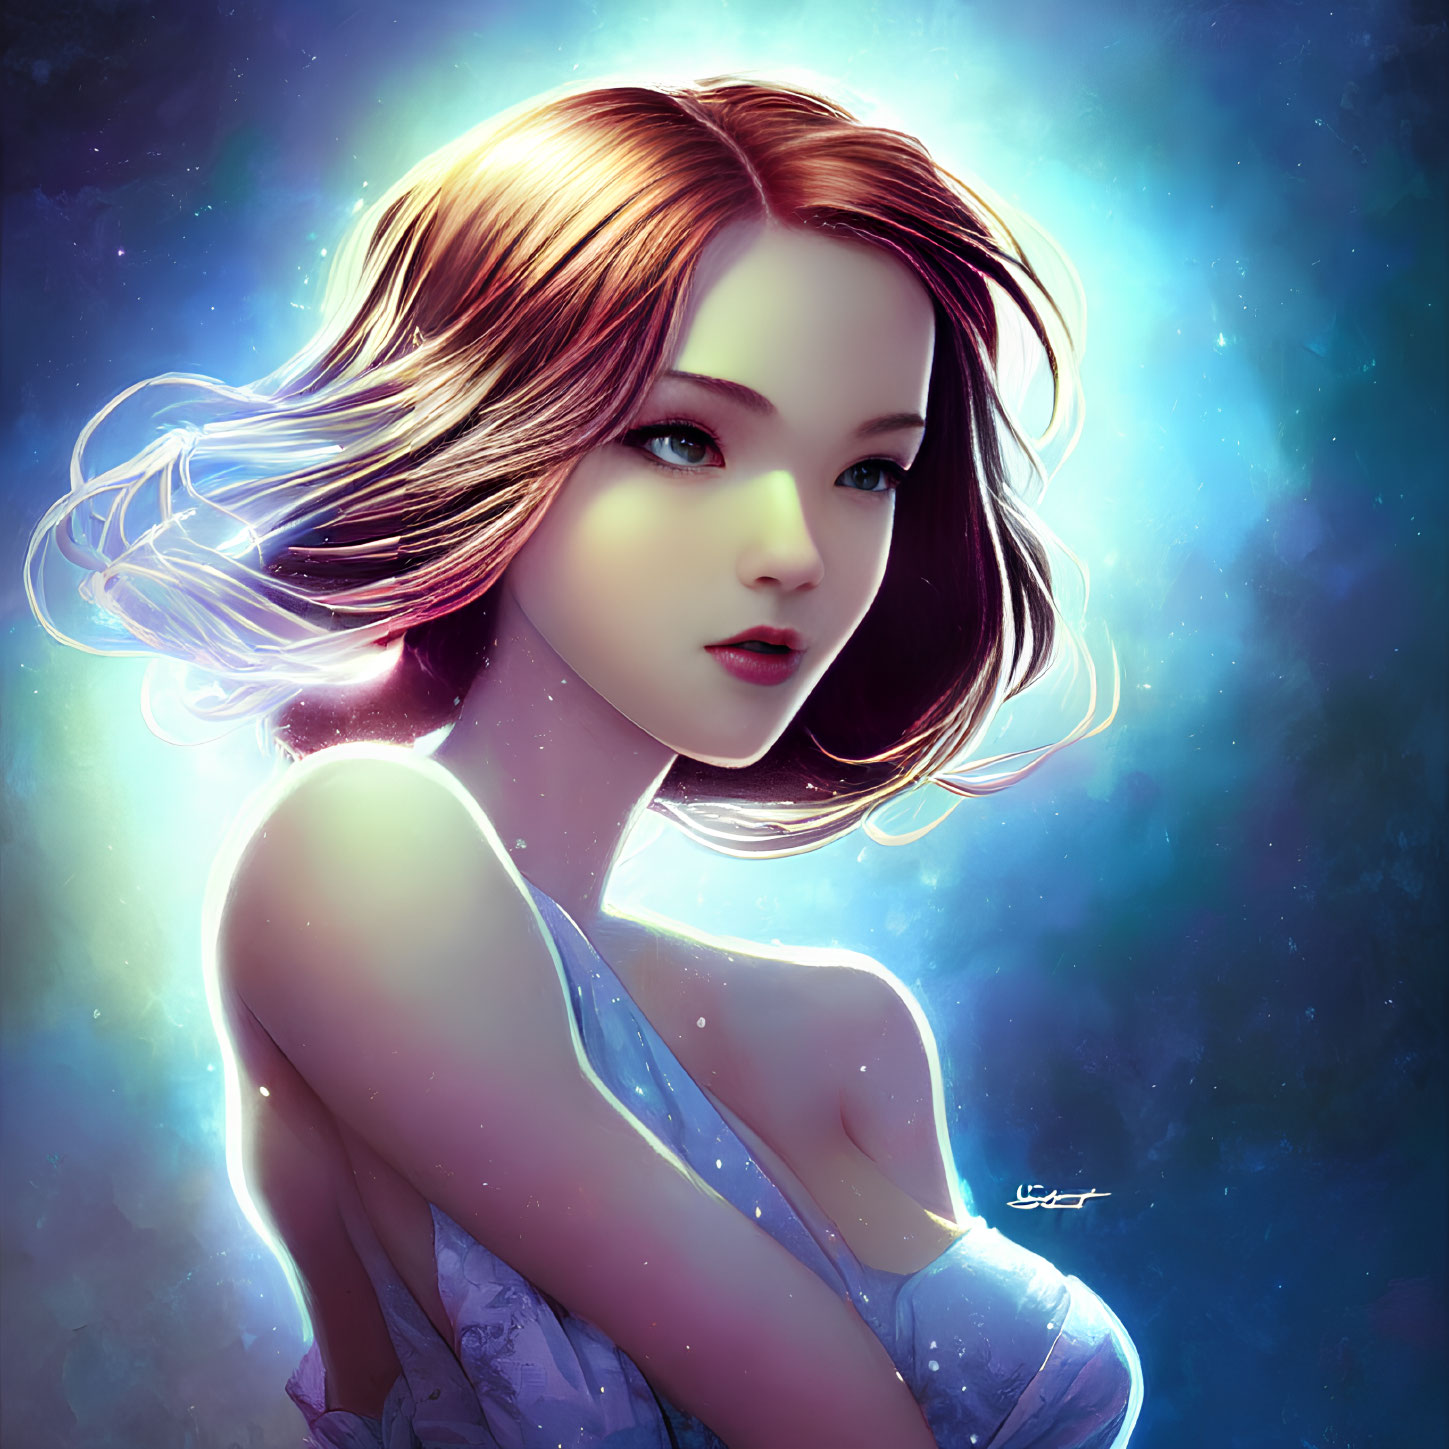 Digital portrait of young woman with flowing hair in ethereal light on blue background